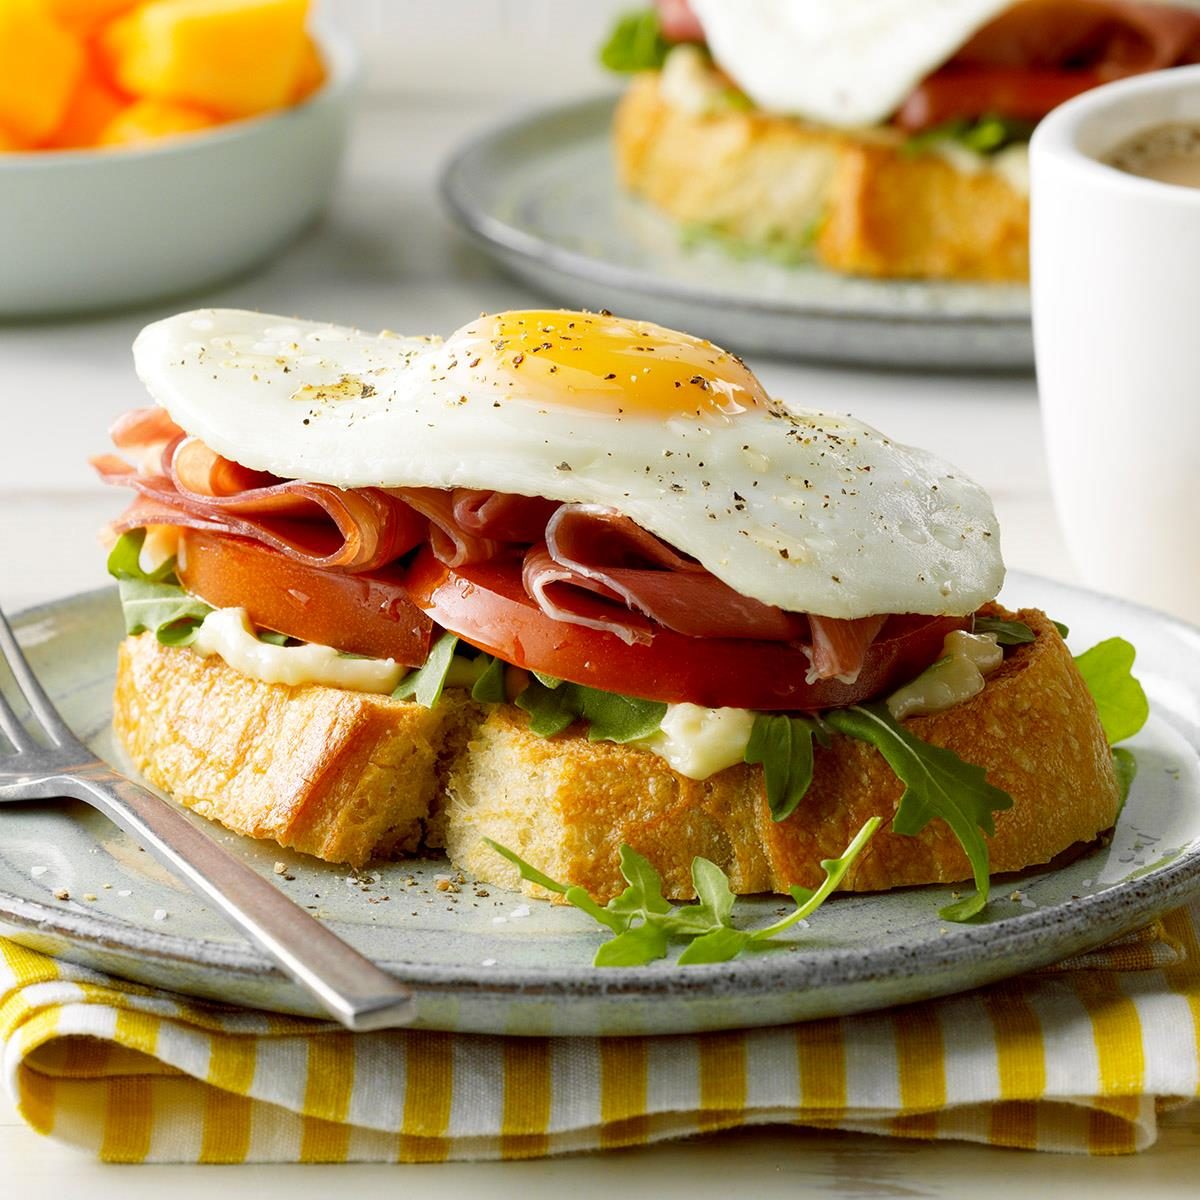 https://www.tasteofhome.com/wp-content/uploads/2019/11/Open-Faced-Prosciutto-and-Egg-Sandwich_EXPS_TOHAM20_58152_E11_07_2b-1.jpg?fit=700%2C1024